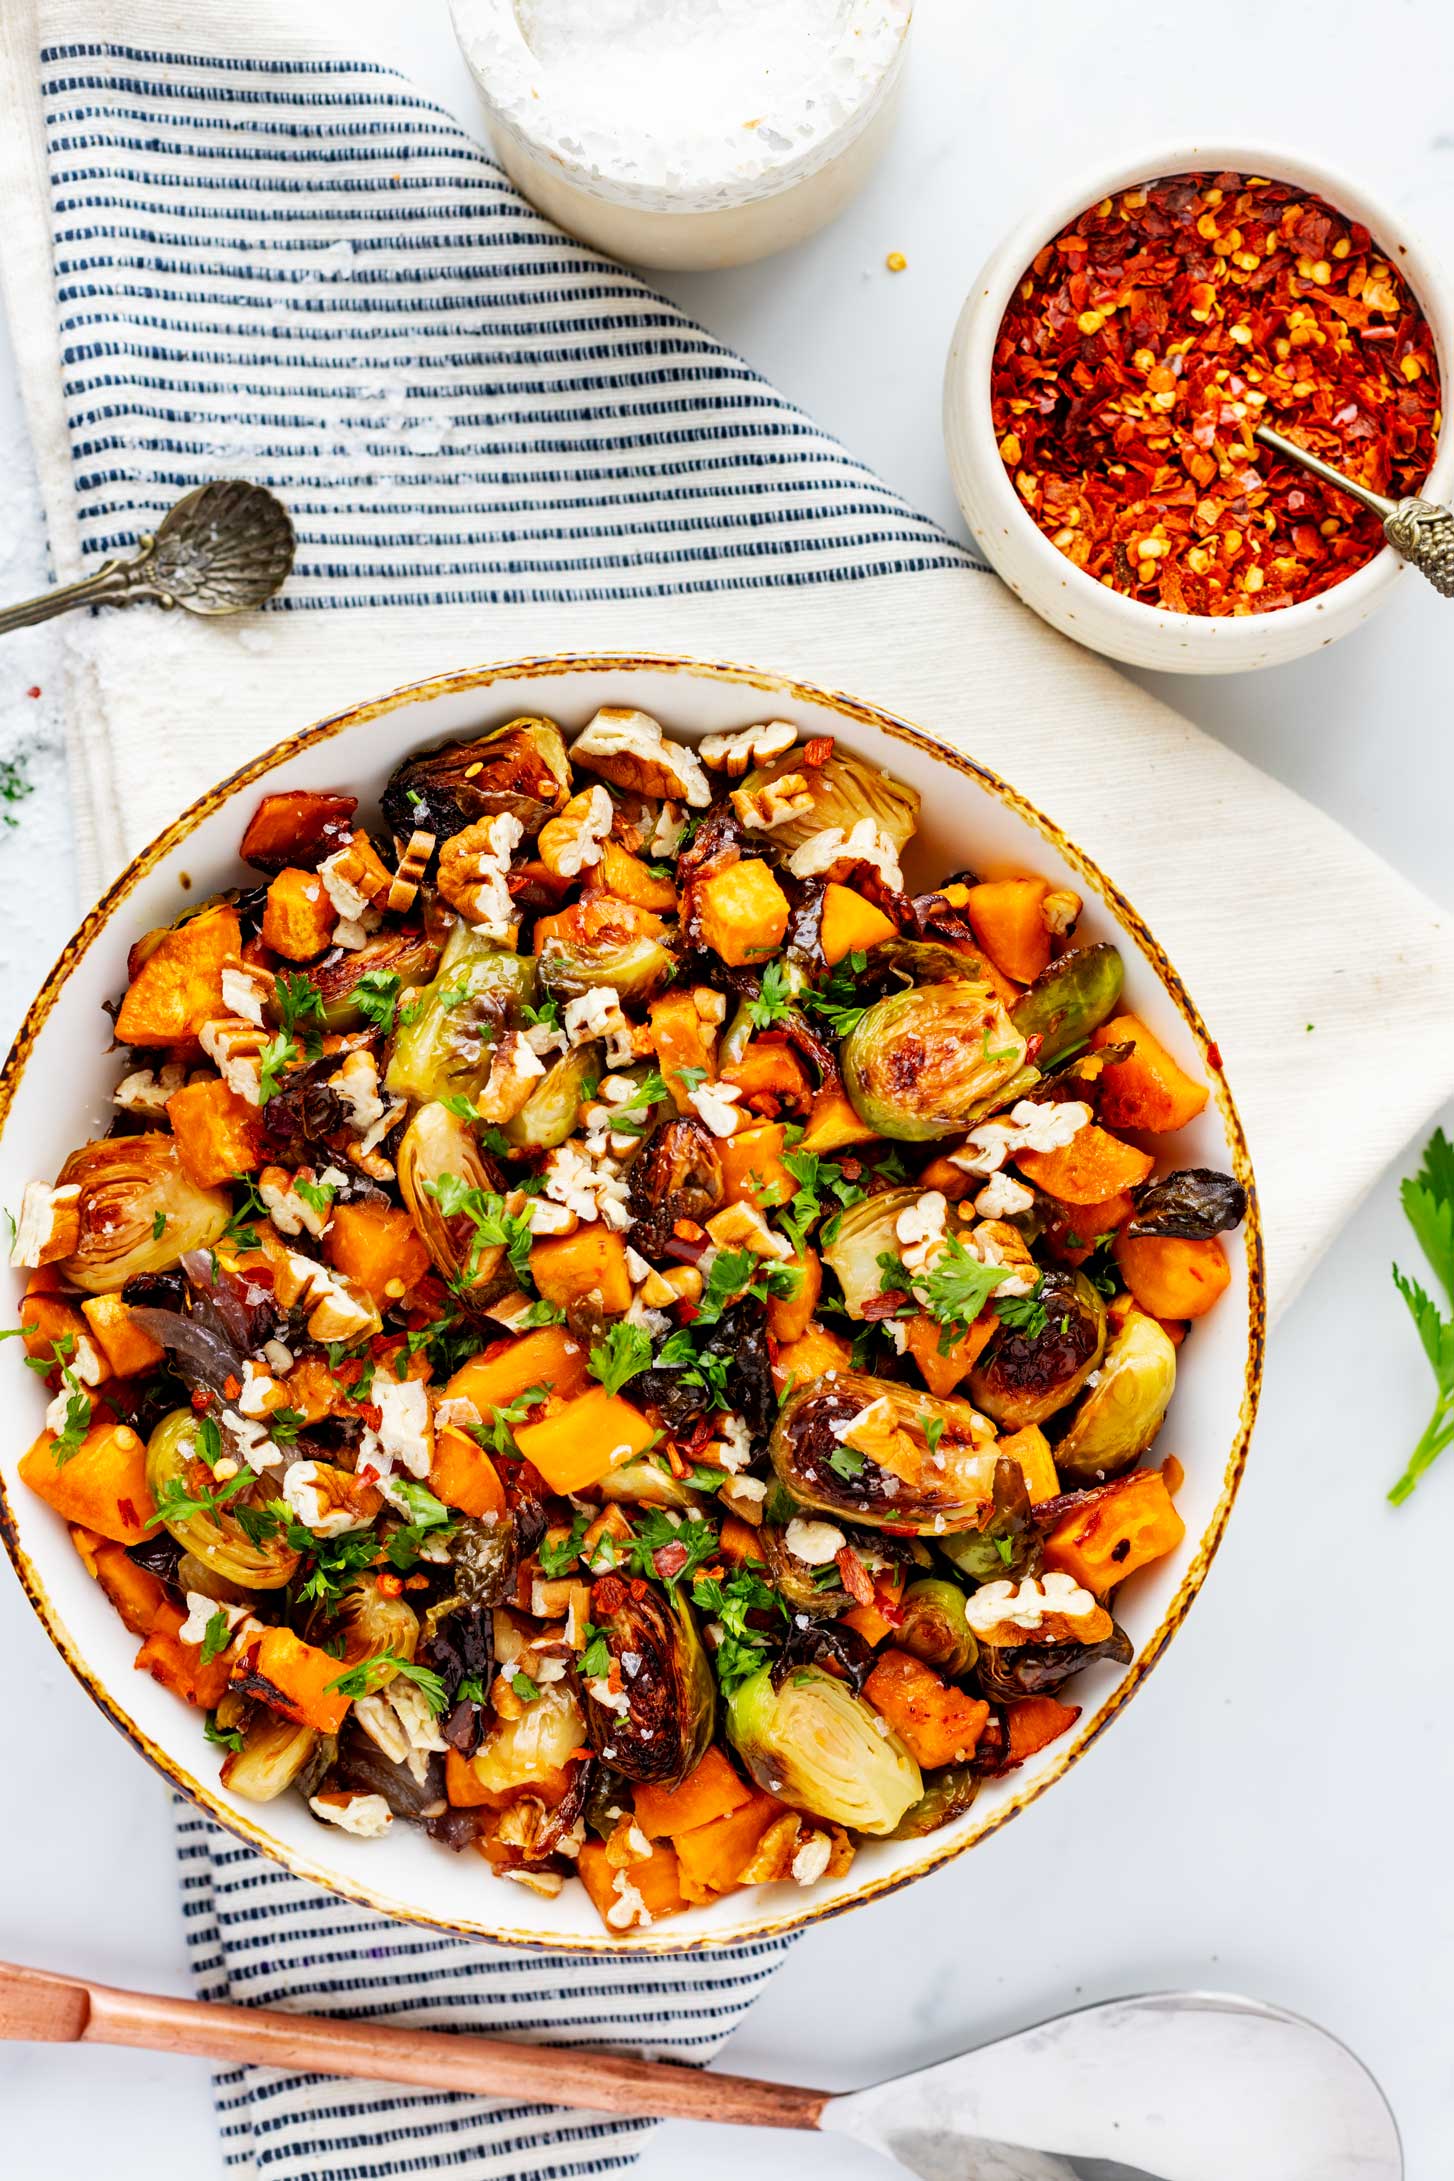 Overhead photo of a rustic bowl with roasted brussels sprouts and sweet potatoes.